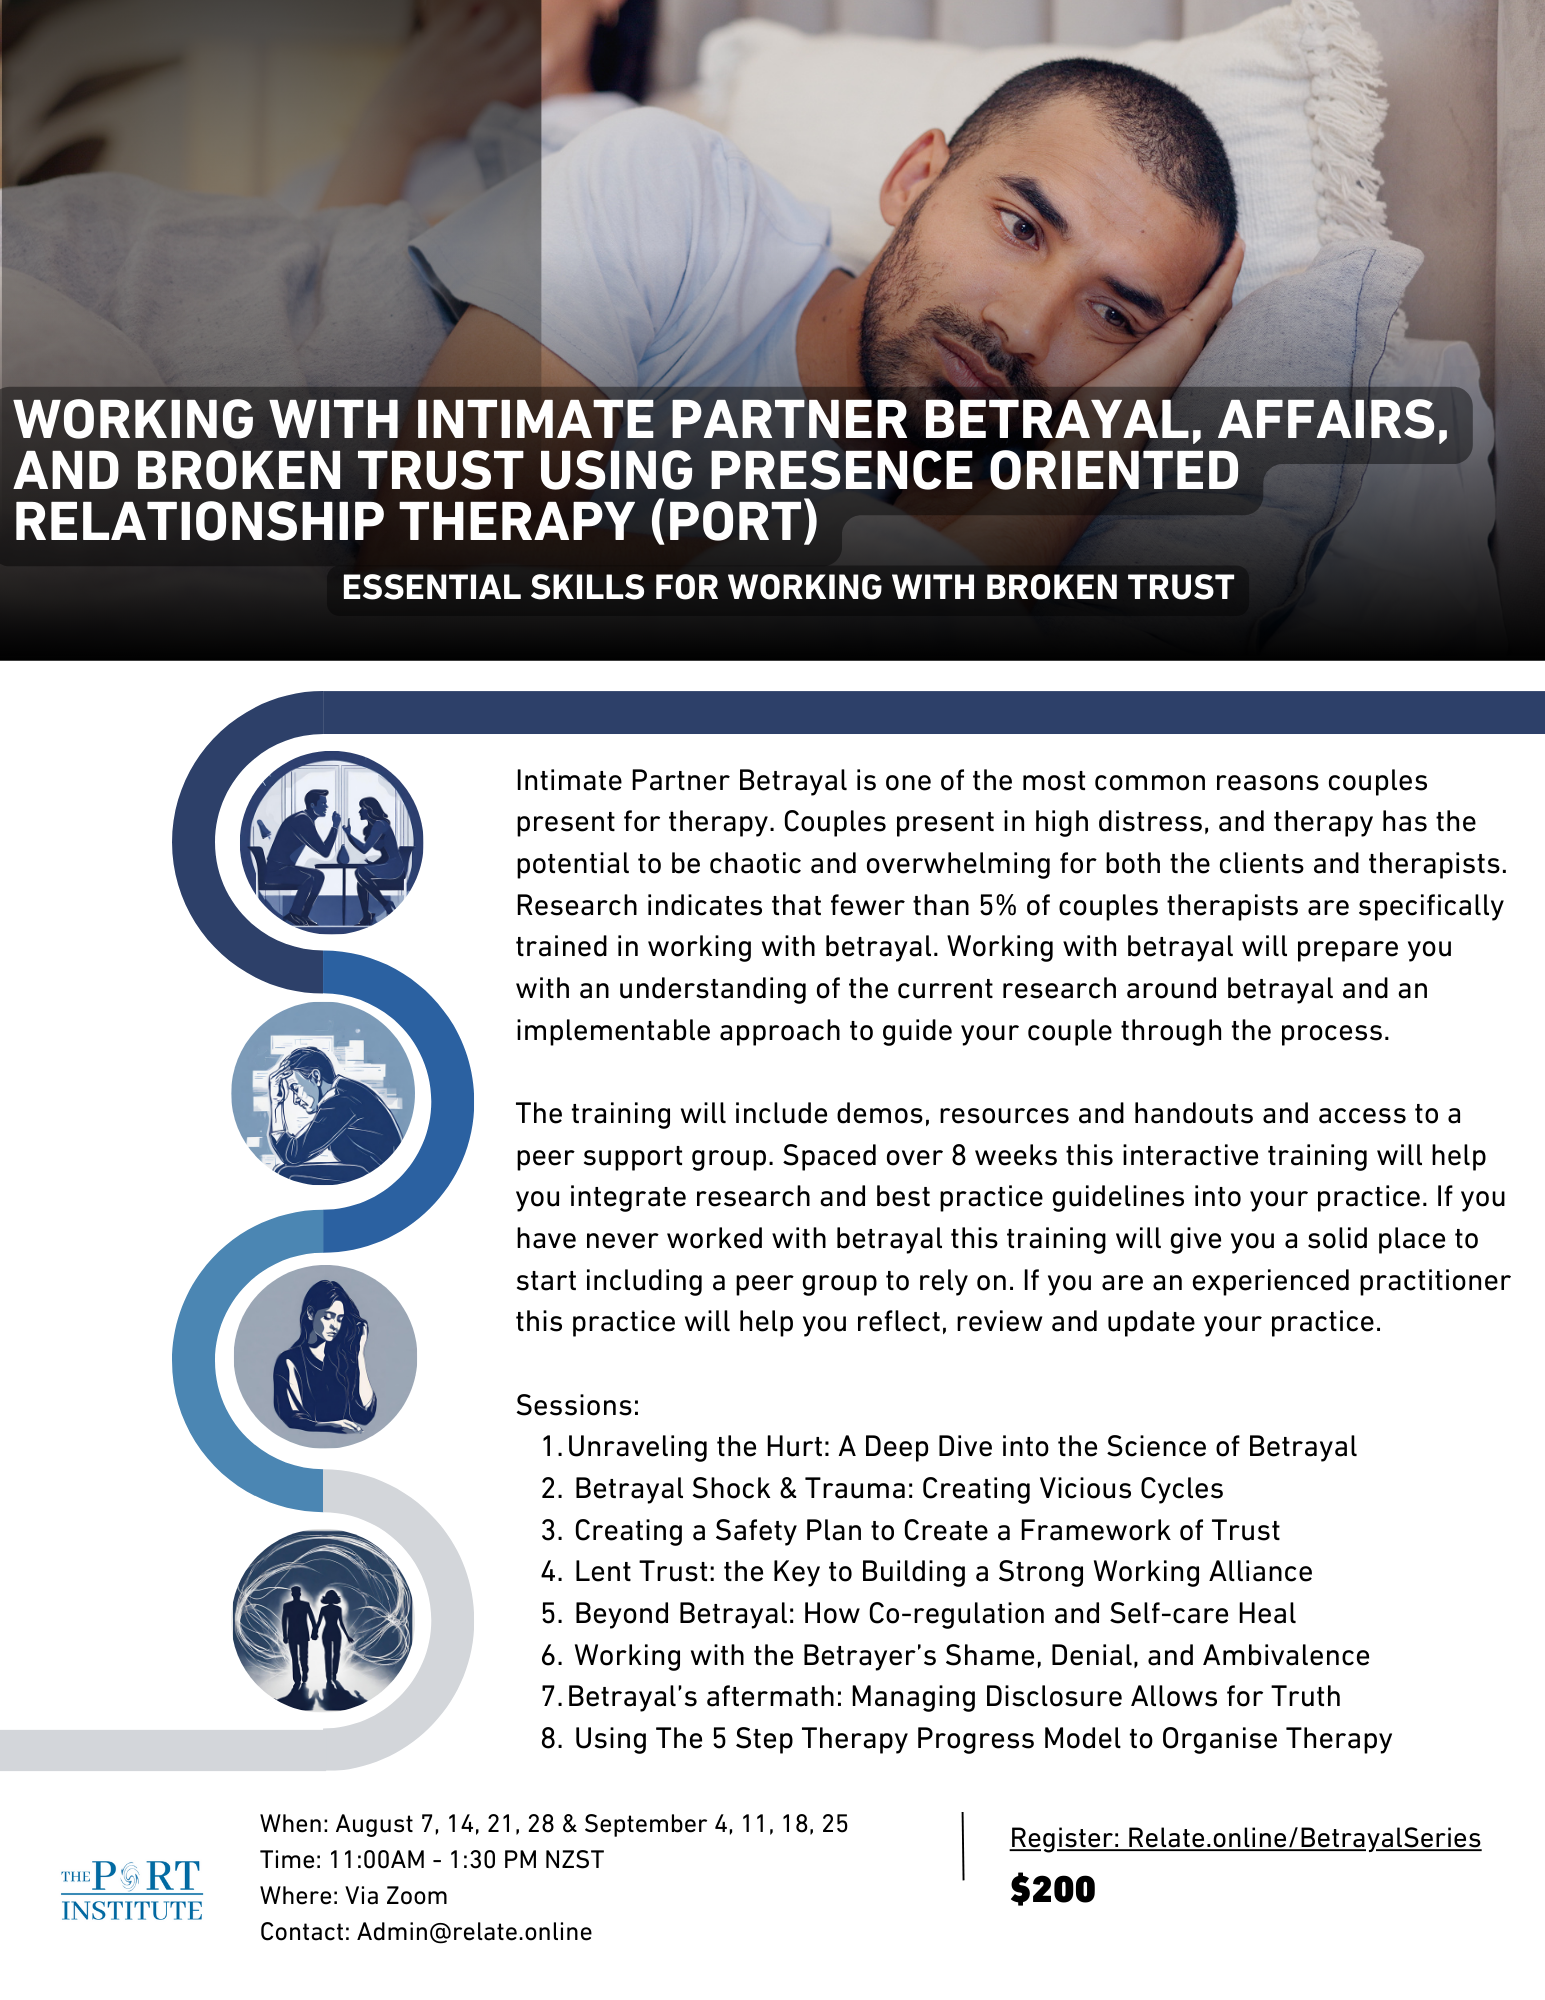 Working with Intimate Partner Betrayal, Affairs, and Broken Trust using PORT